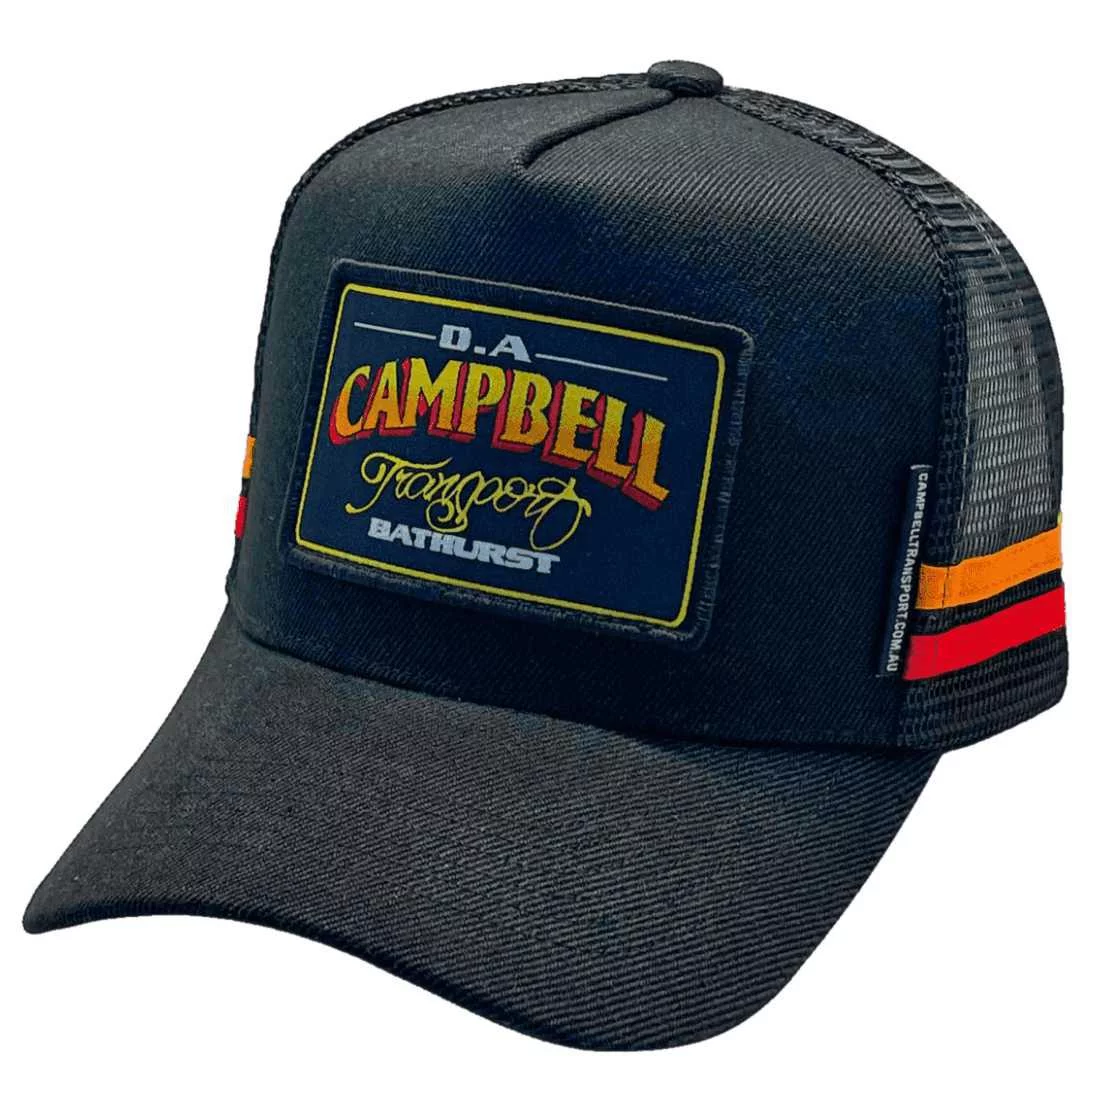 D. A. Campbell Transport Bathurst NSW HP Original Midrange Aussie Trucker Hat  with Graduated Woven Sew-on Label on Crown and Double Sidebands